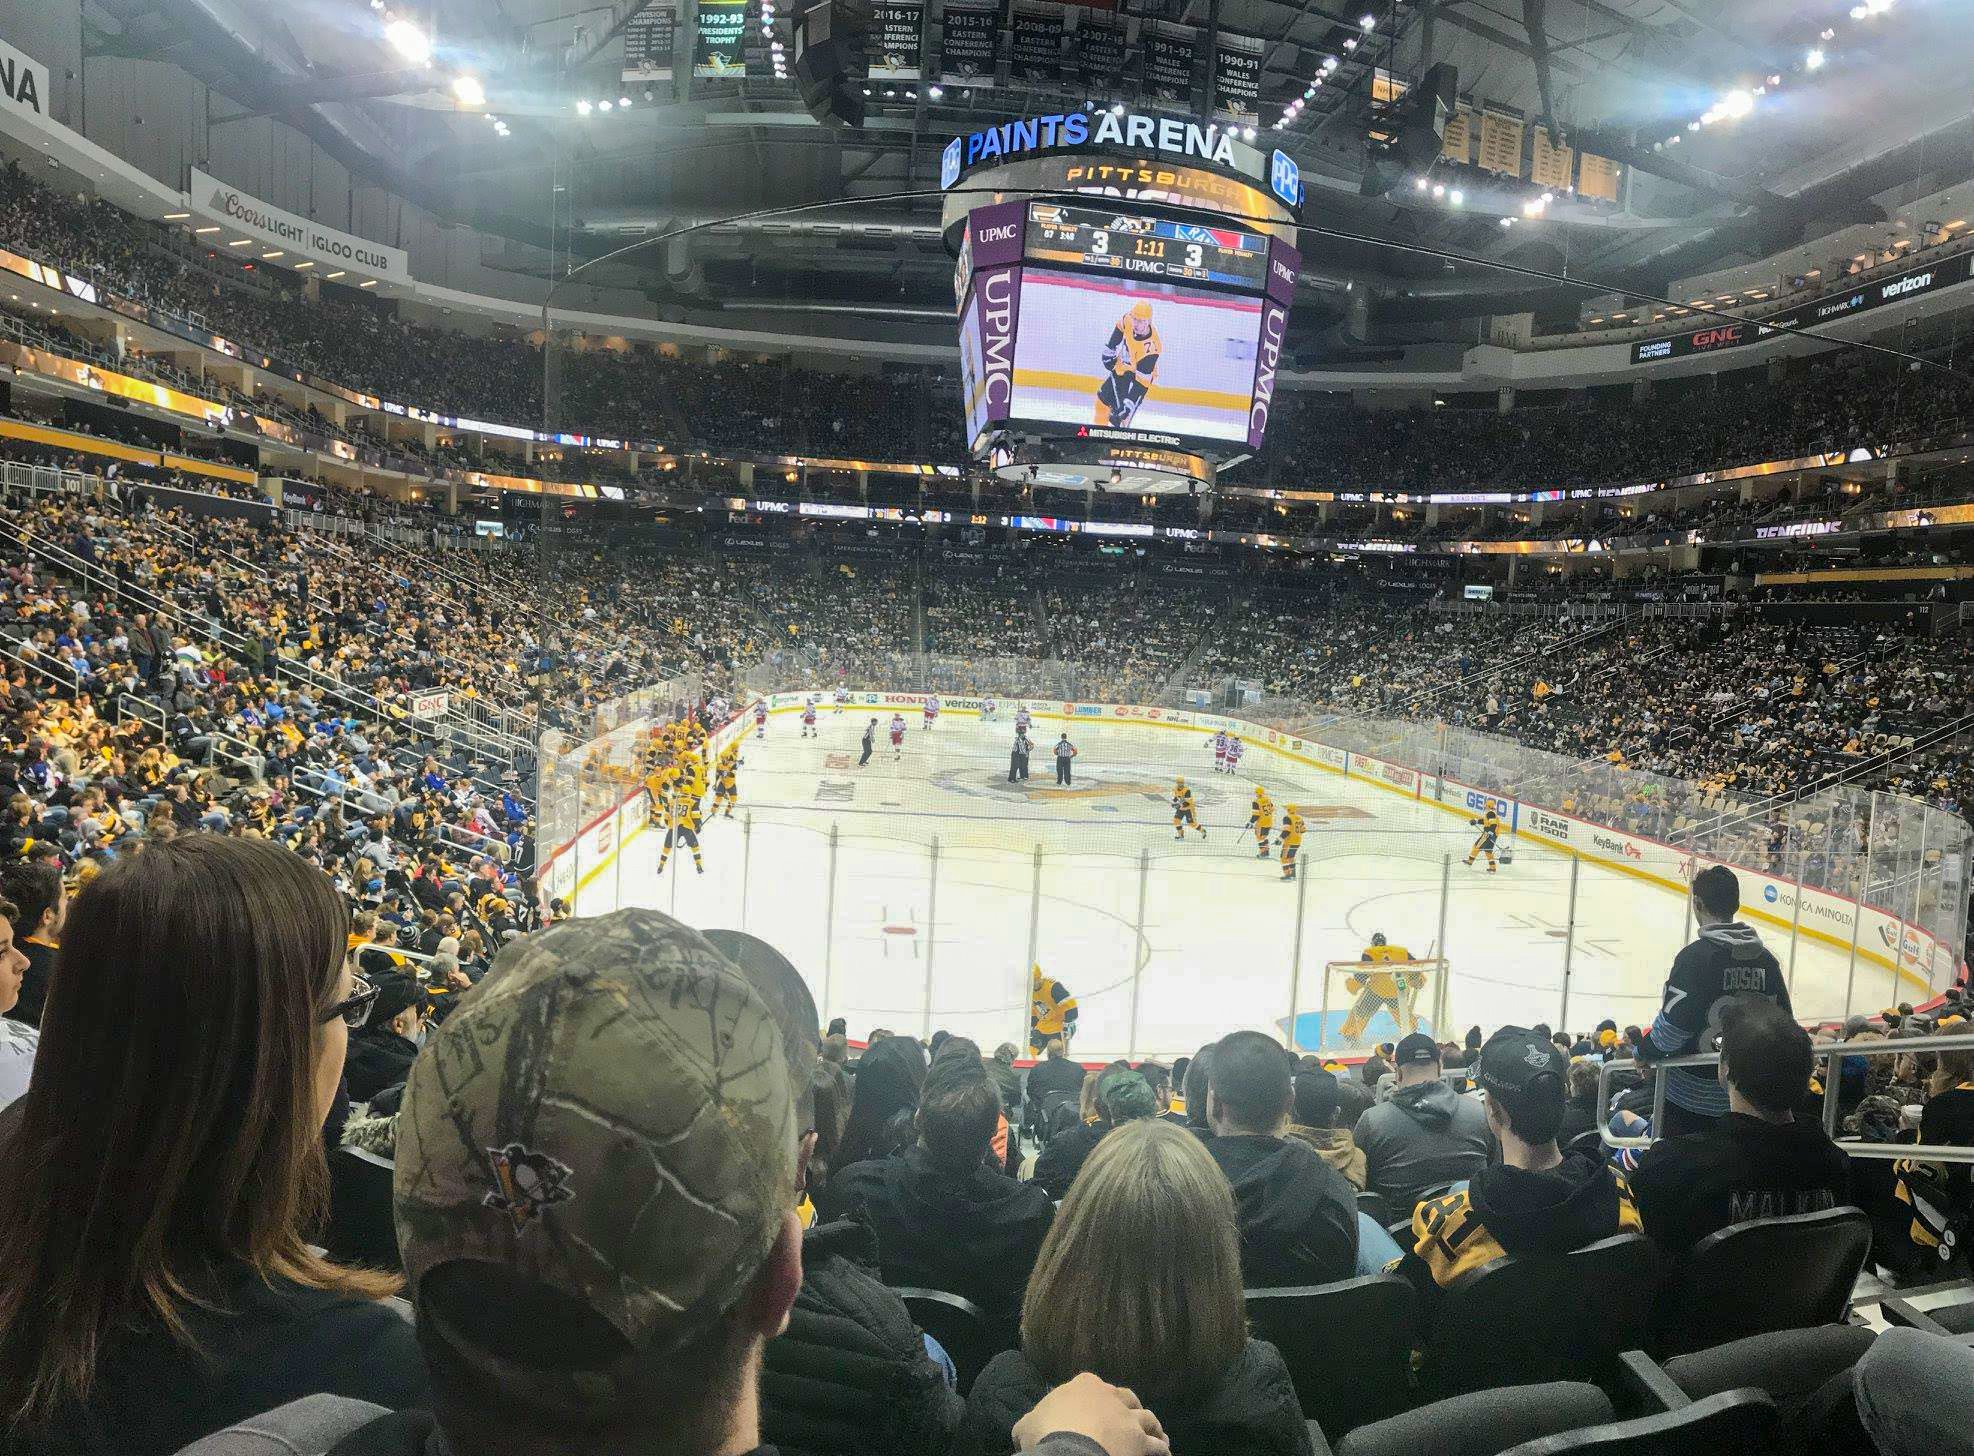 A picture of the PPG Paints Arena during a Penguins game in 2019.